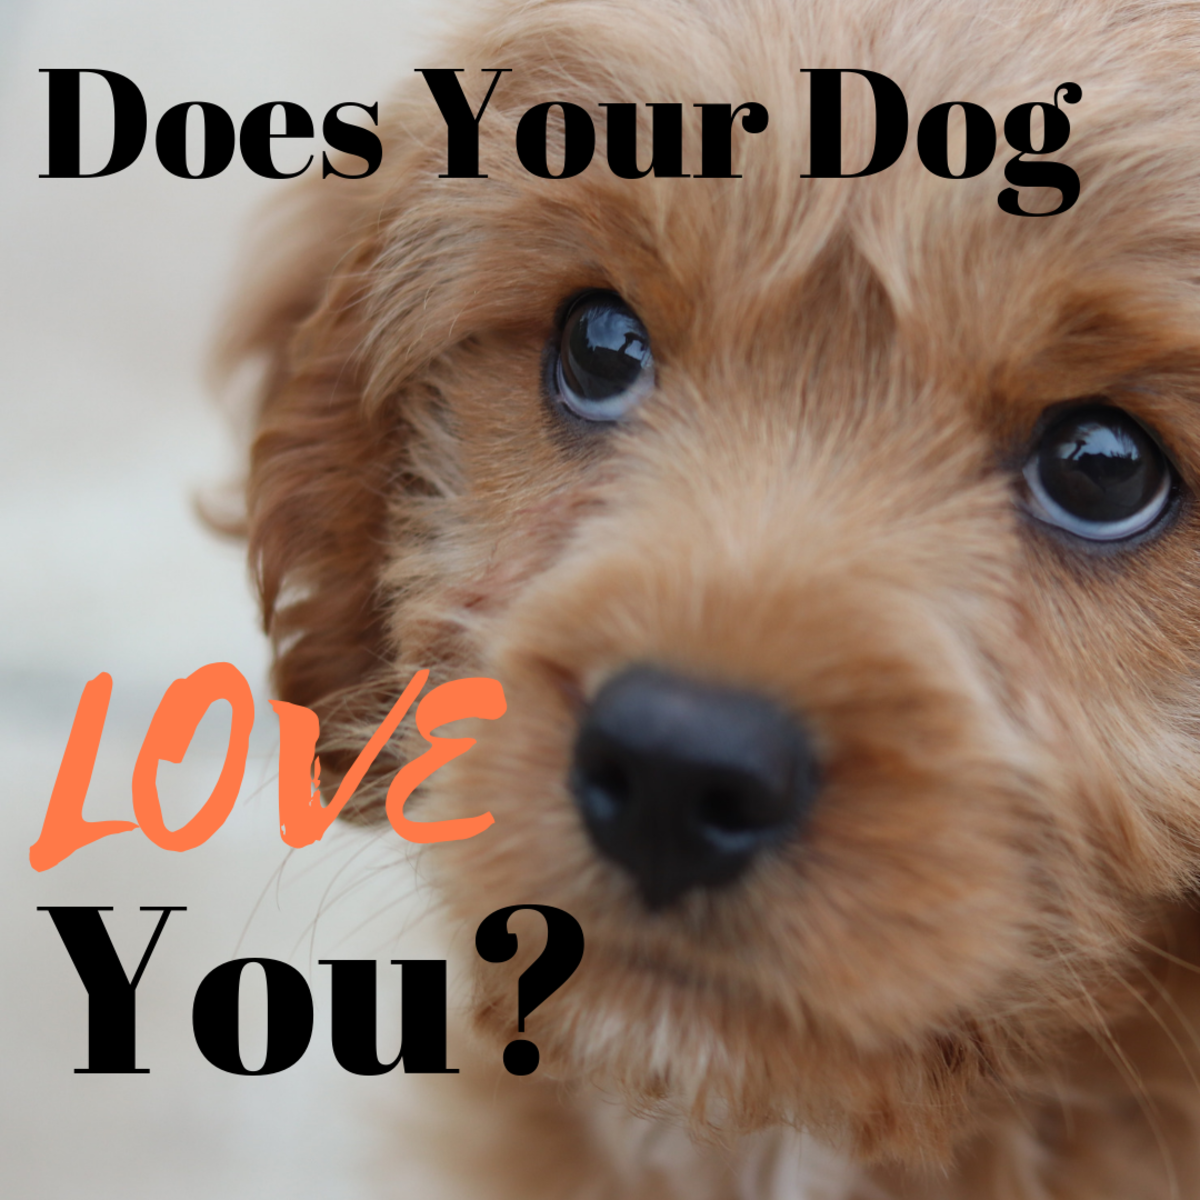 Let's be honest: we're all curious about whether our furry companions love us as much as we do them. 